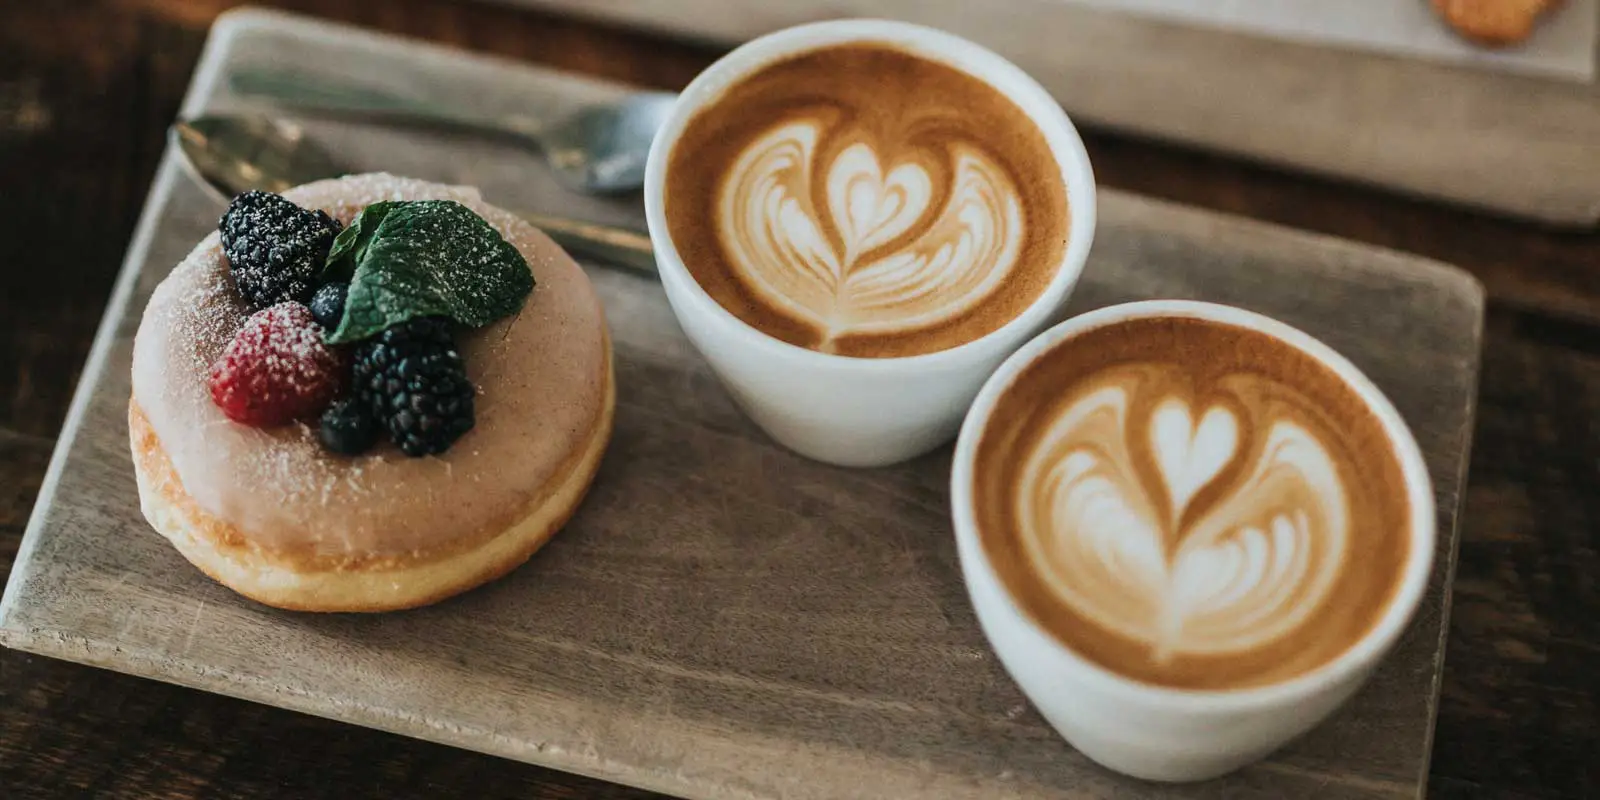 Flatlay photo of 2 cappucinos and a donut with berries on top.